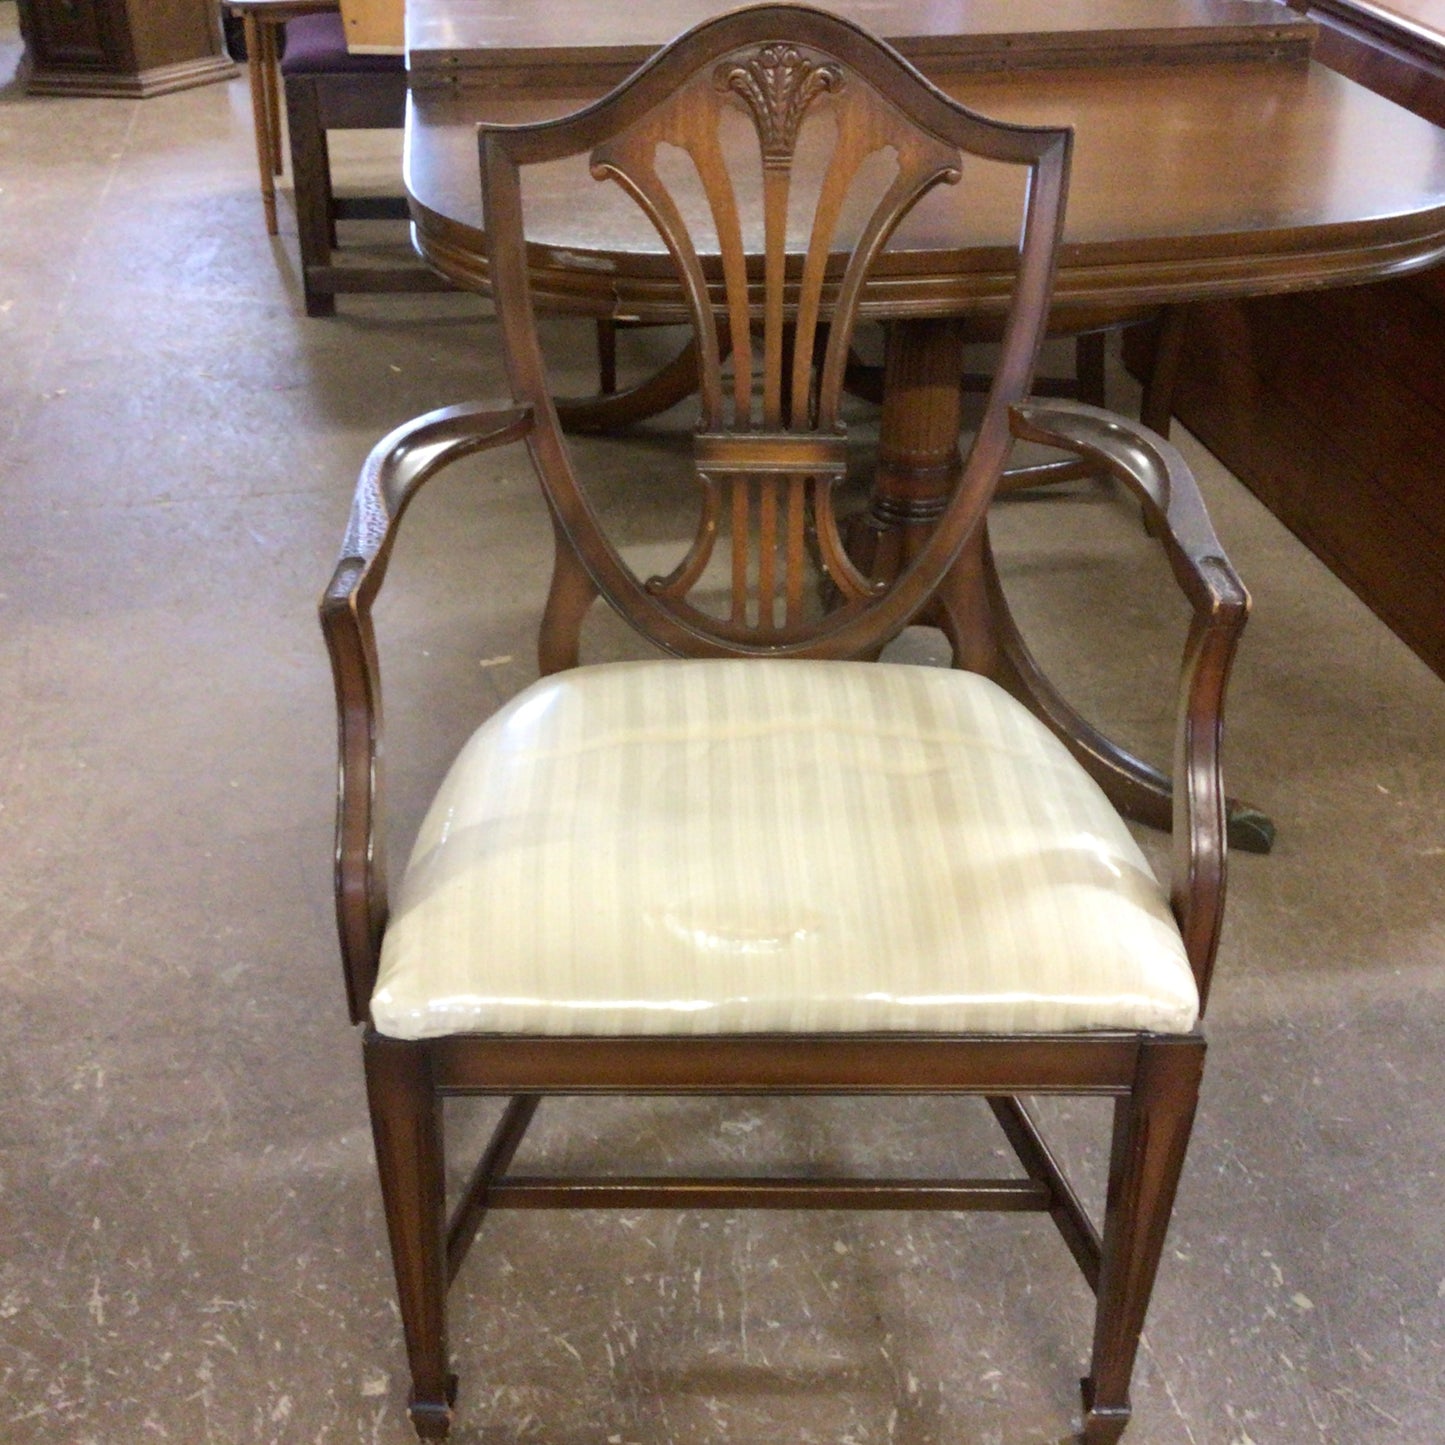 Vintage Duncan Phyfe Style Dining Table and 6 Hepplewhite Shield Style Back Chairs.